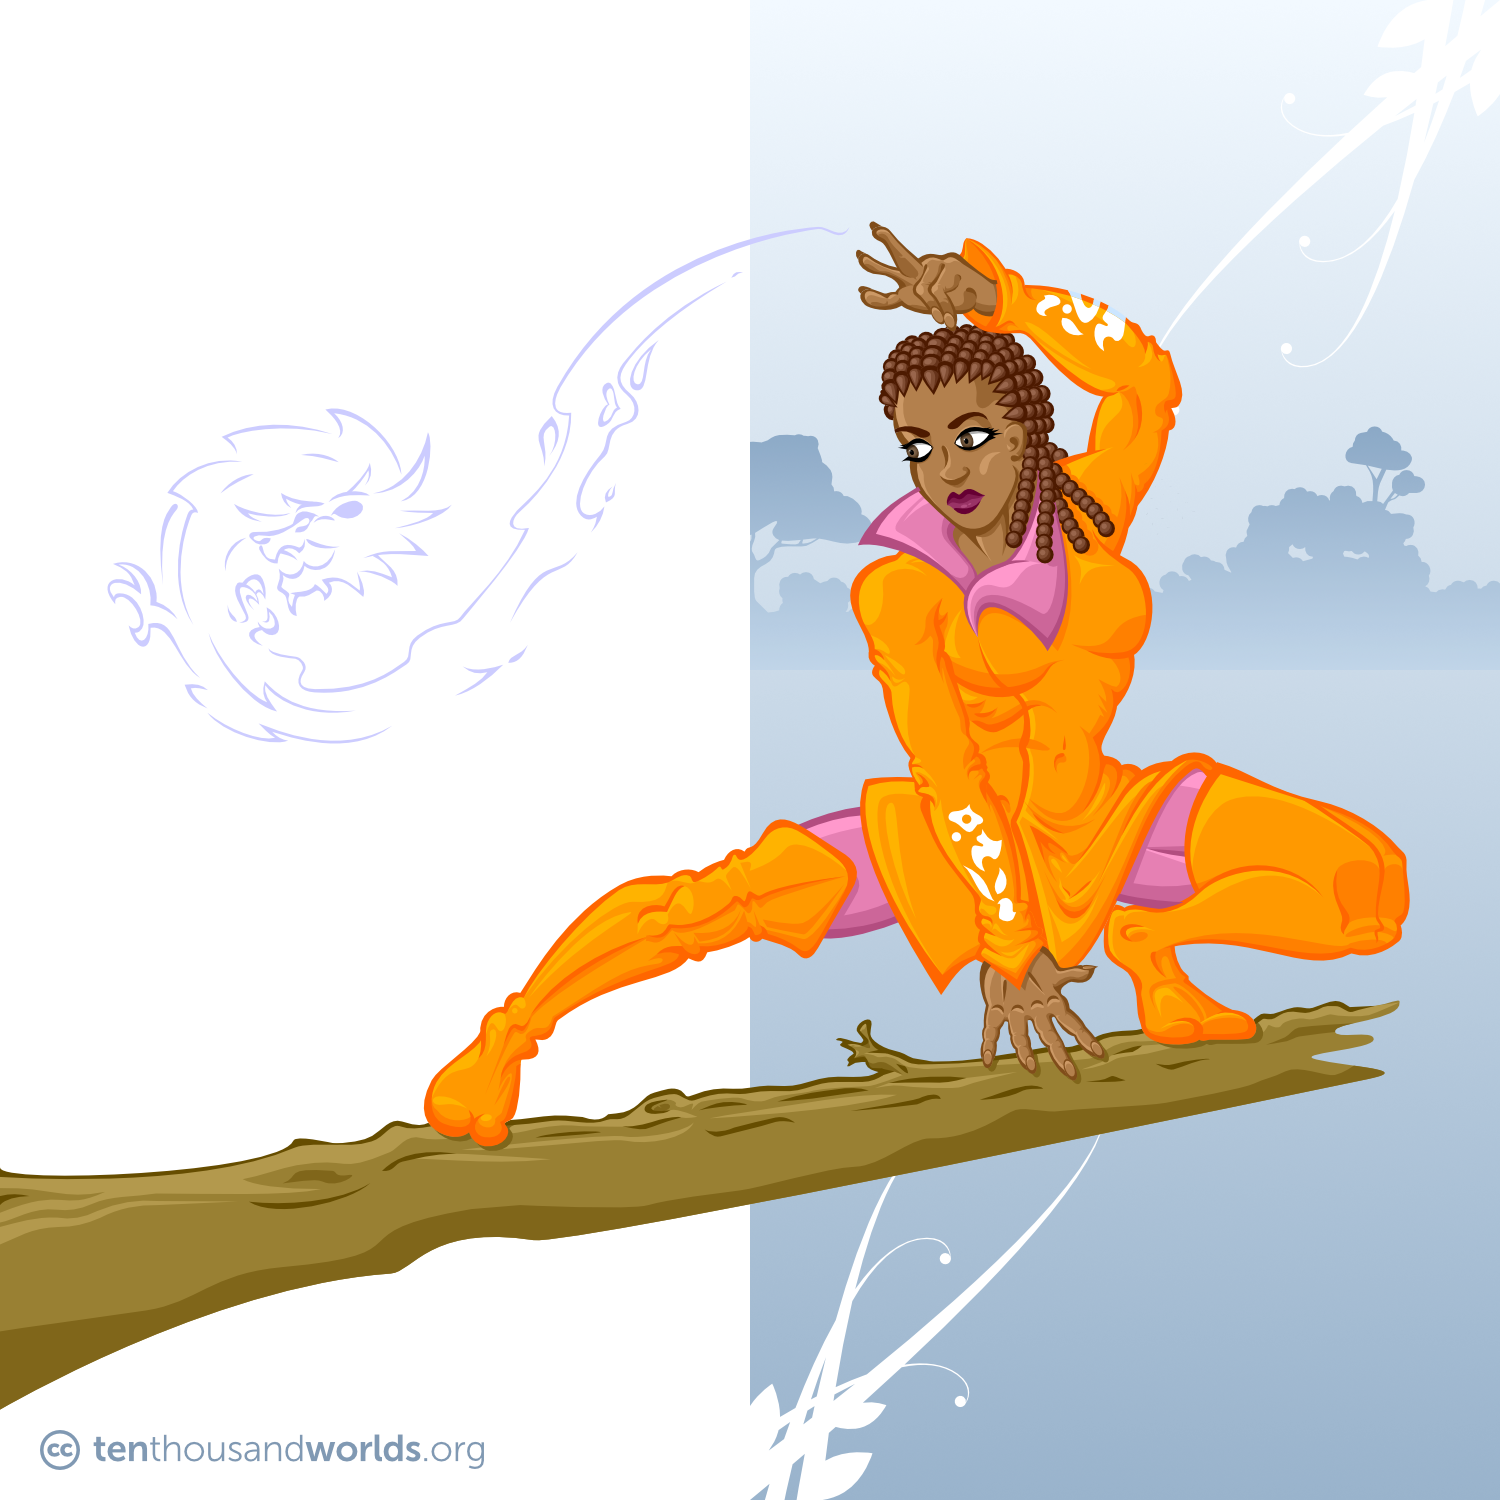 A woman crouched on a tree branch in a martial pose, one hand upraised to make mystic sign from which a misty dragon shape uncoils itself into the air. She wears elegant copper-brown corn-rows, tall split-toe orange boots, and an asymmetrical orange coat adorned with white magical runes on the sleeves.